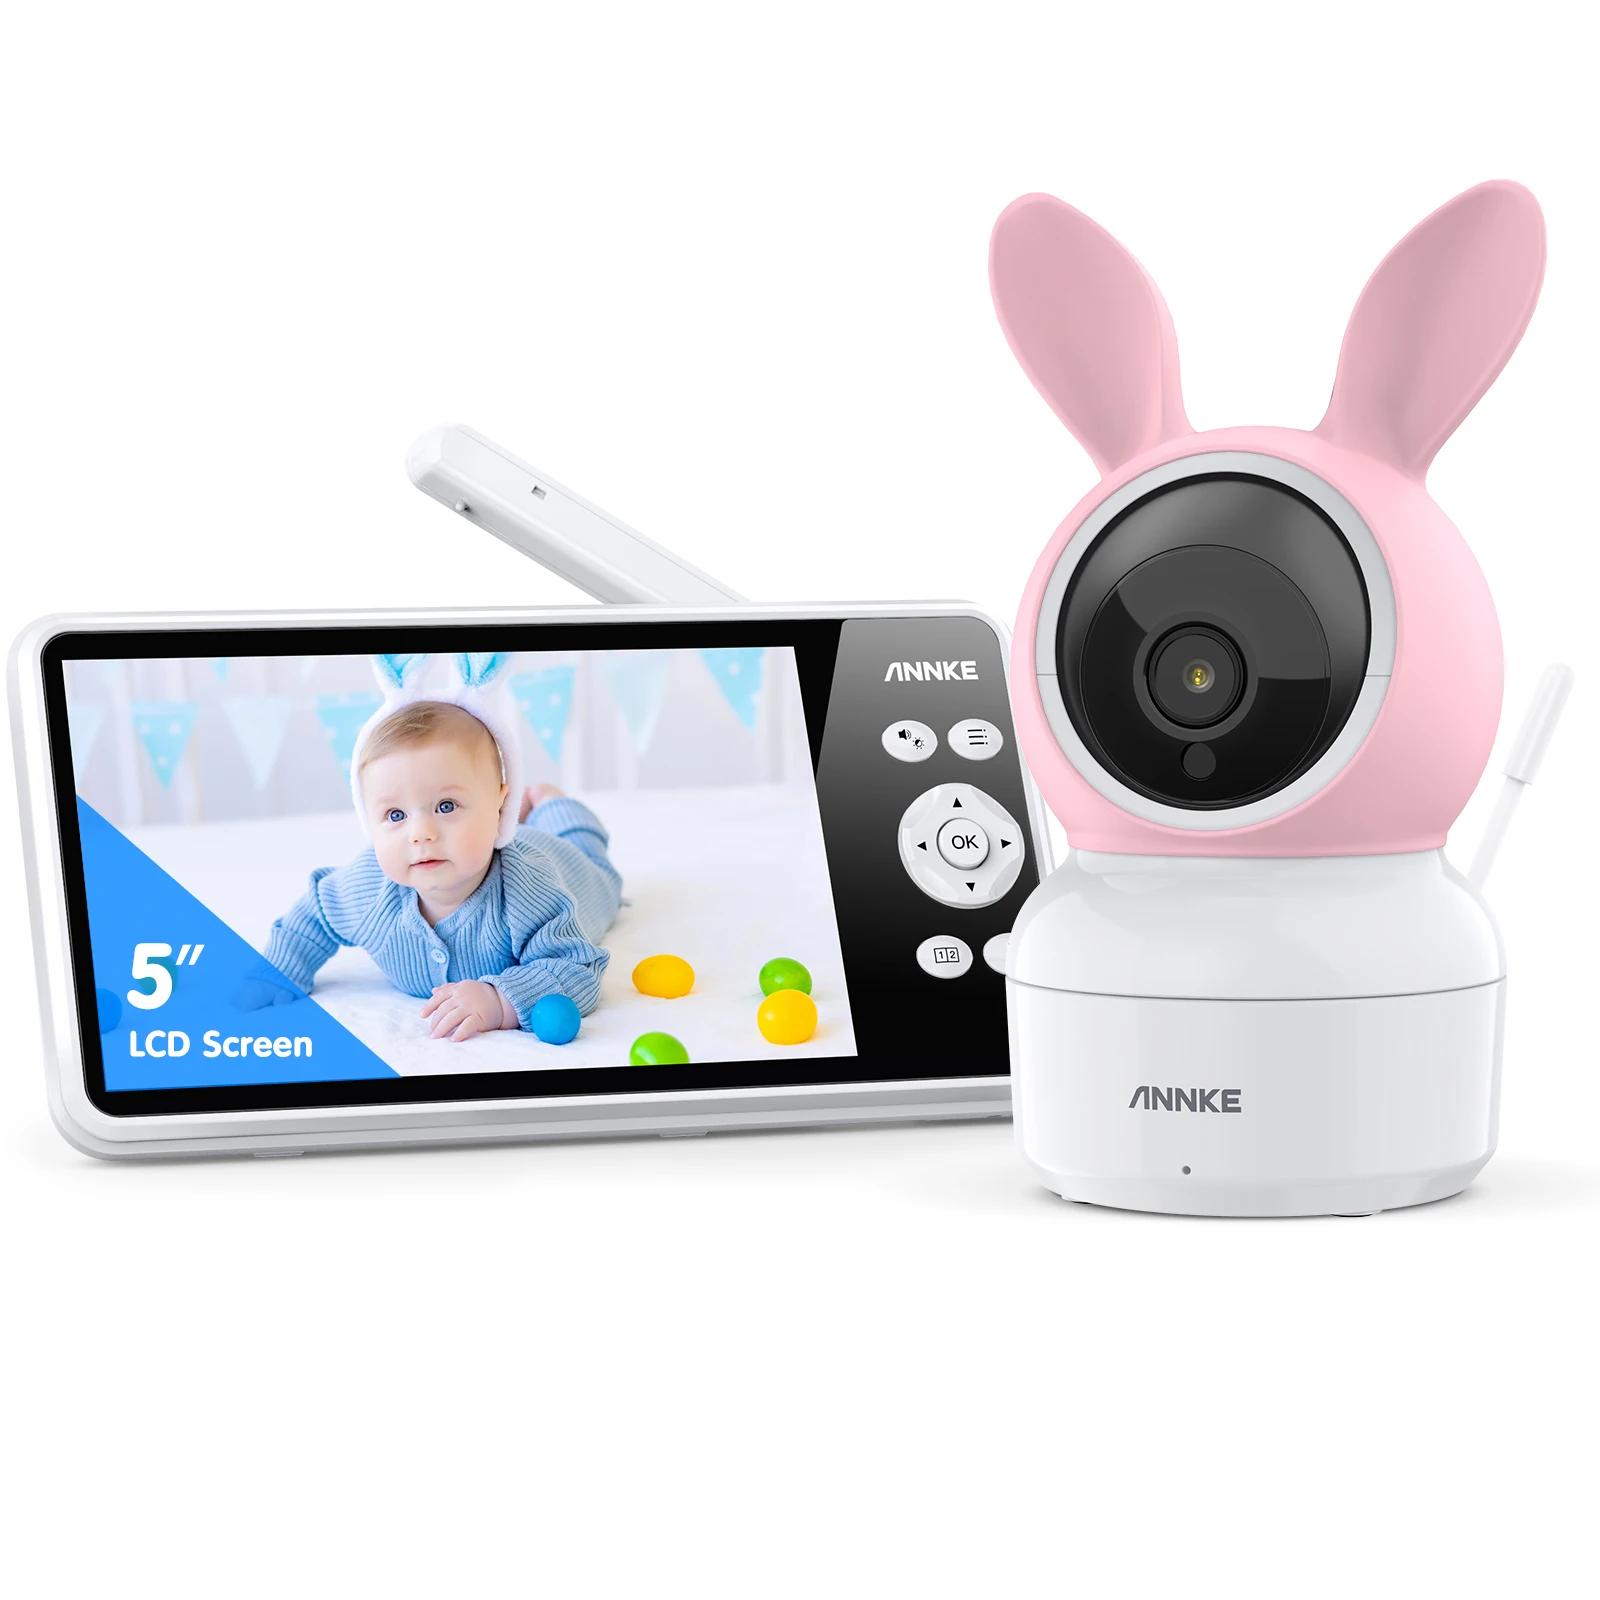 

ANNKE 720P WiFi Baby Monitor with Camera Temperature & Motion & Sound Alert Audio Night Vision Baby Camera Monitor